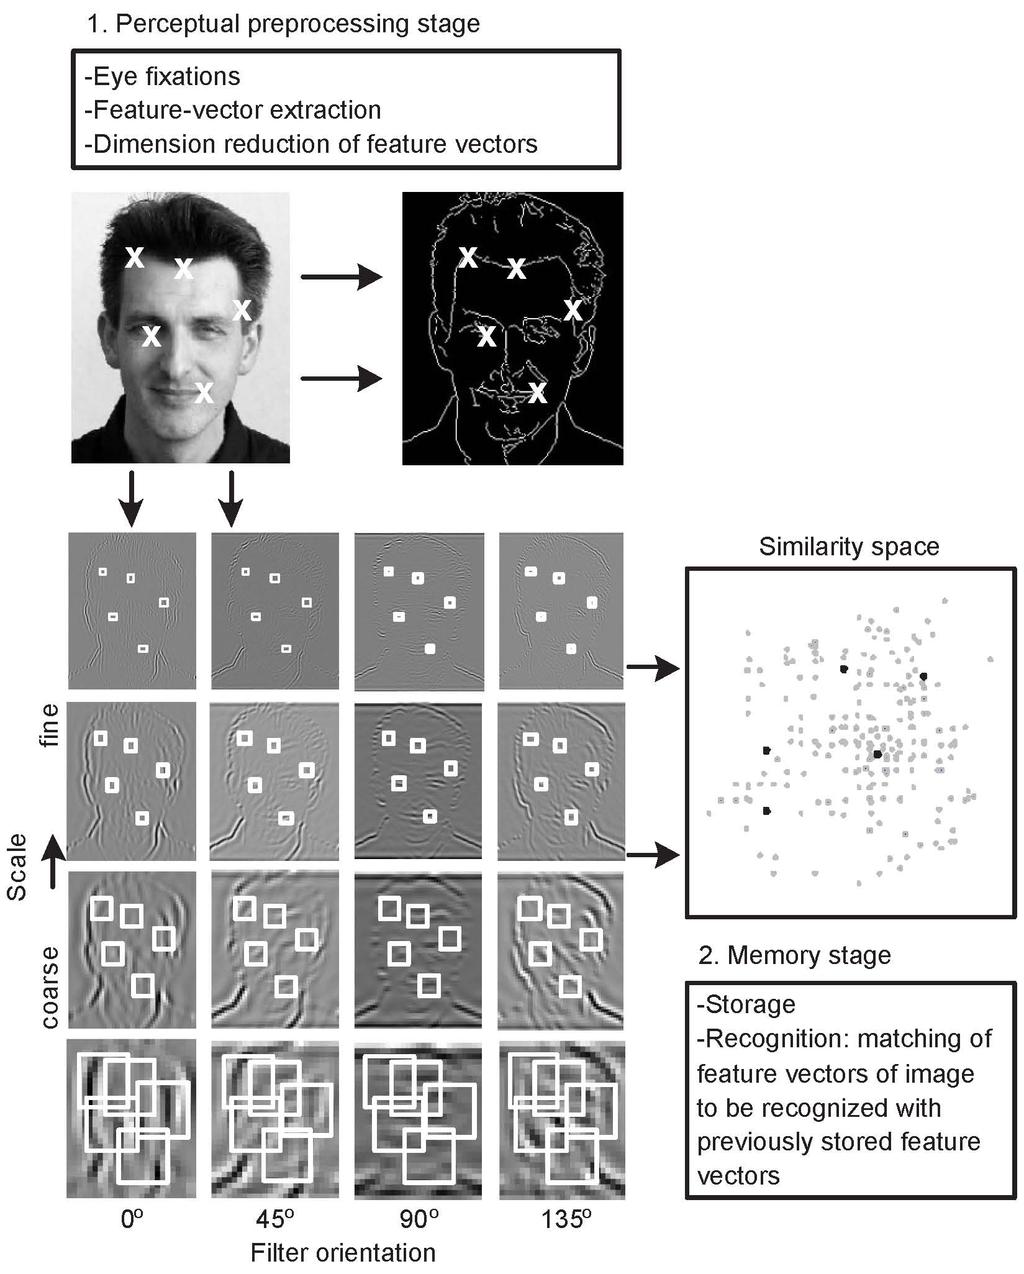 the first experiment, we test whether the similarity-space representations can be used to infer scene-schema knowledge of a specific category of natural stimuli, i.e., natural face images.